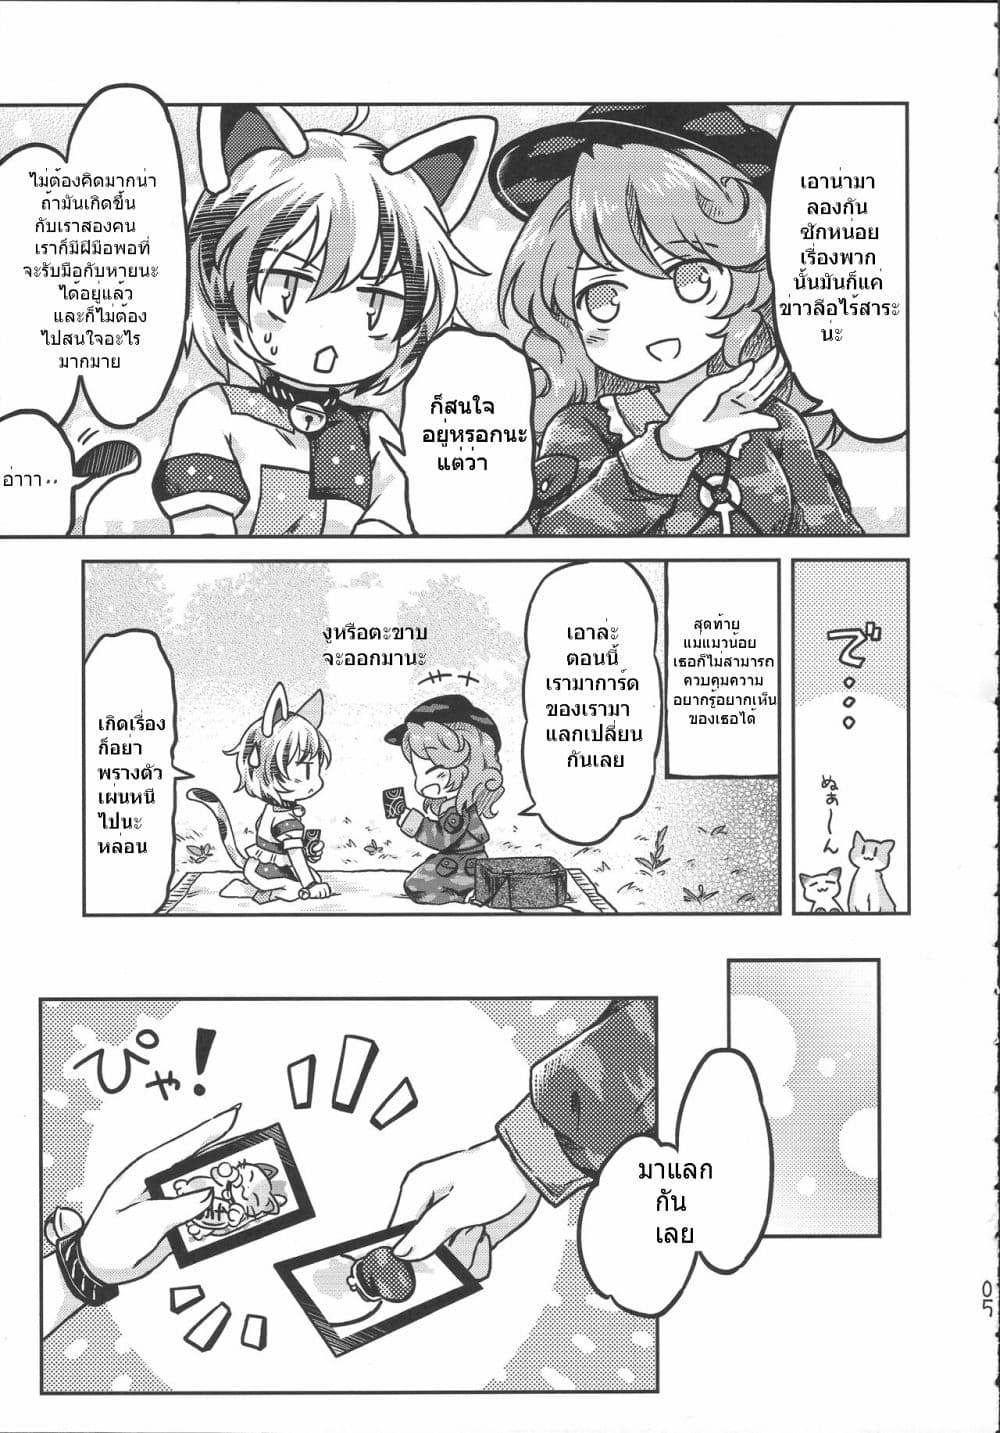 Touhou Project Chima Book By Pote ตอนที่ 1 (4)